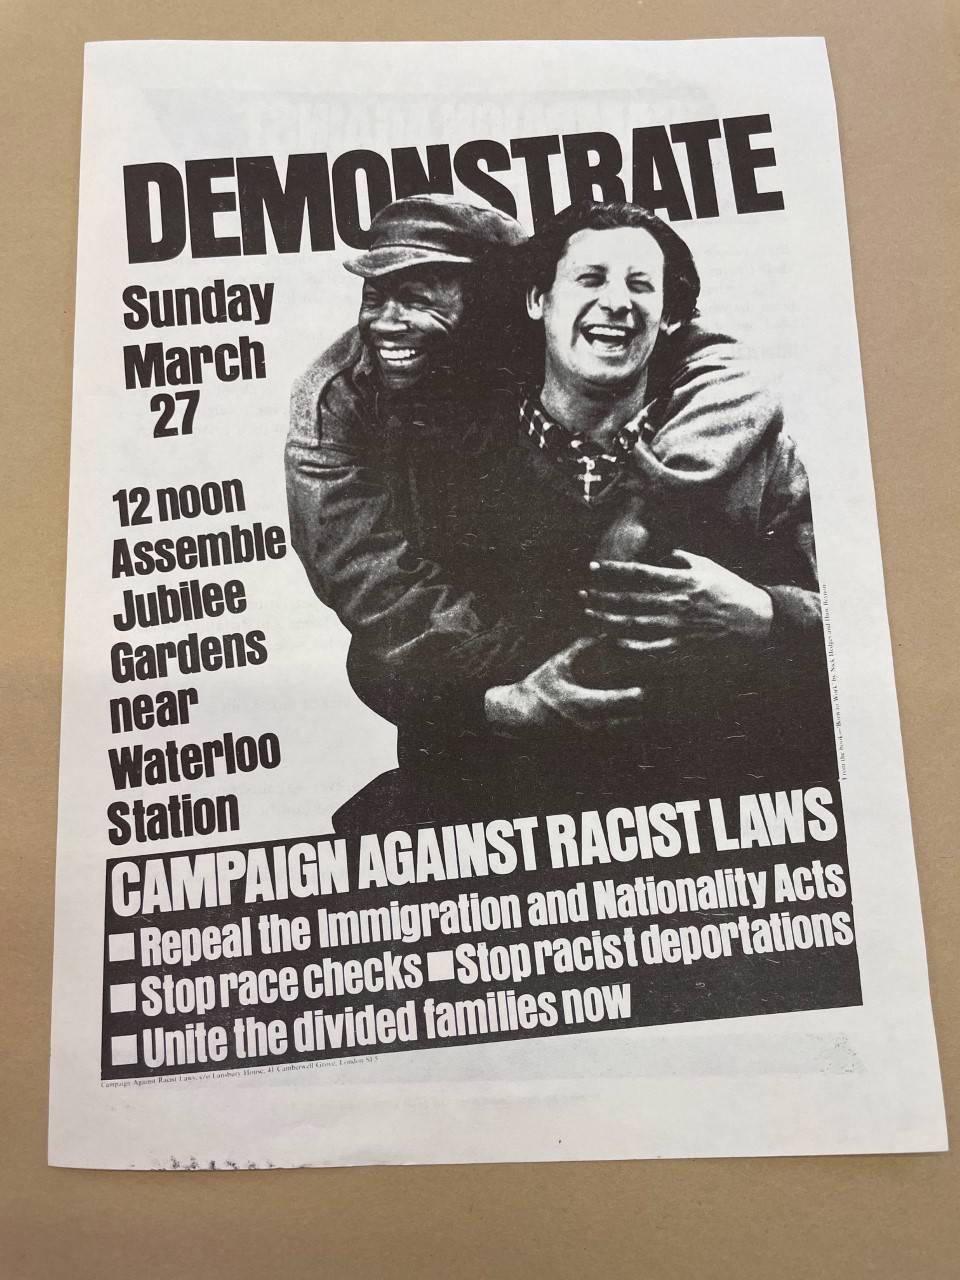 Surprising lessons from the 1980s: inspiration from anti-deportation campaign activism